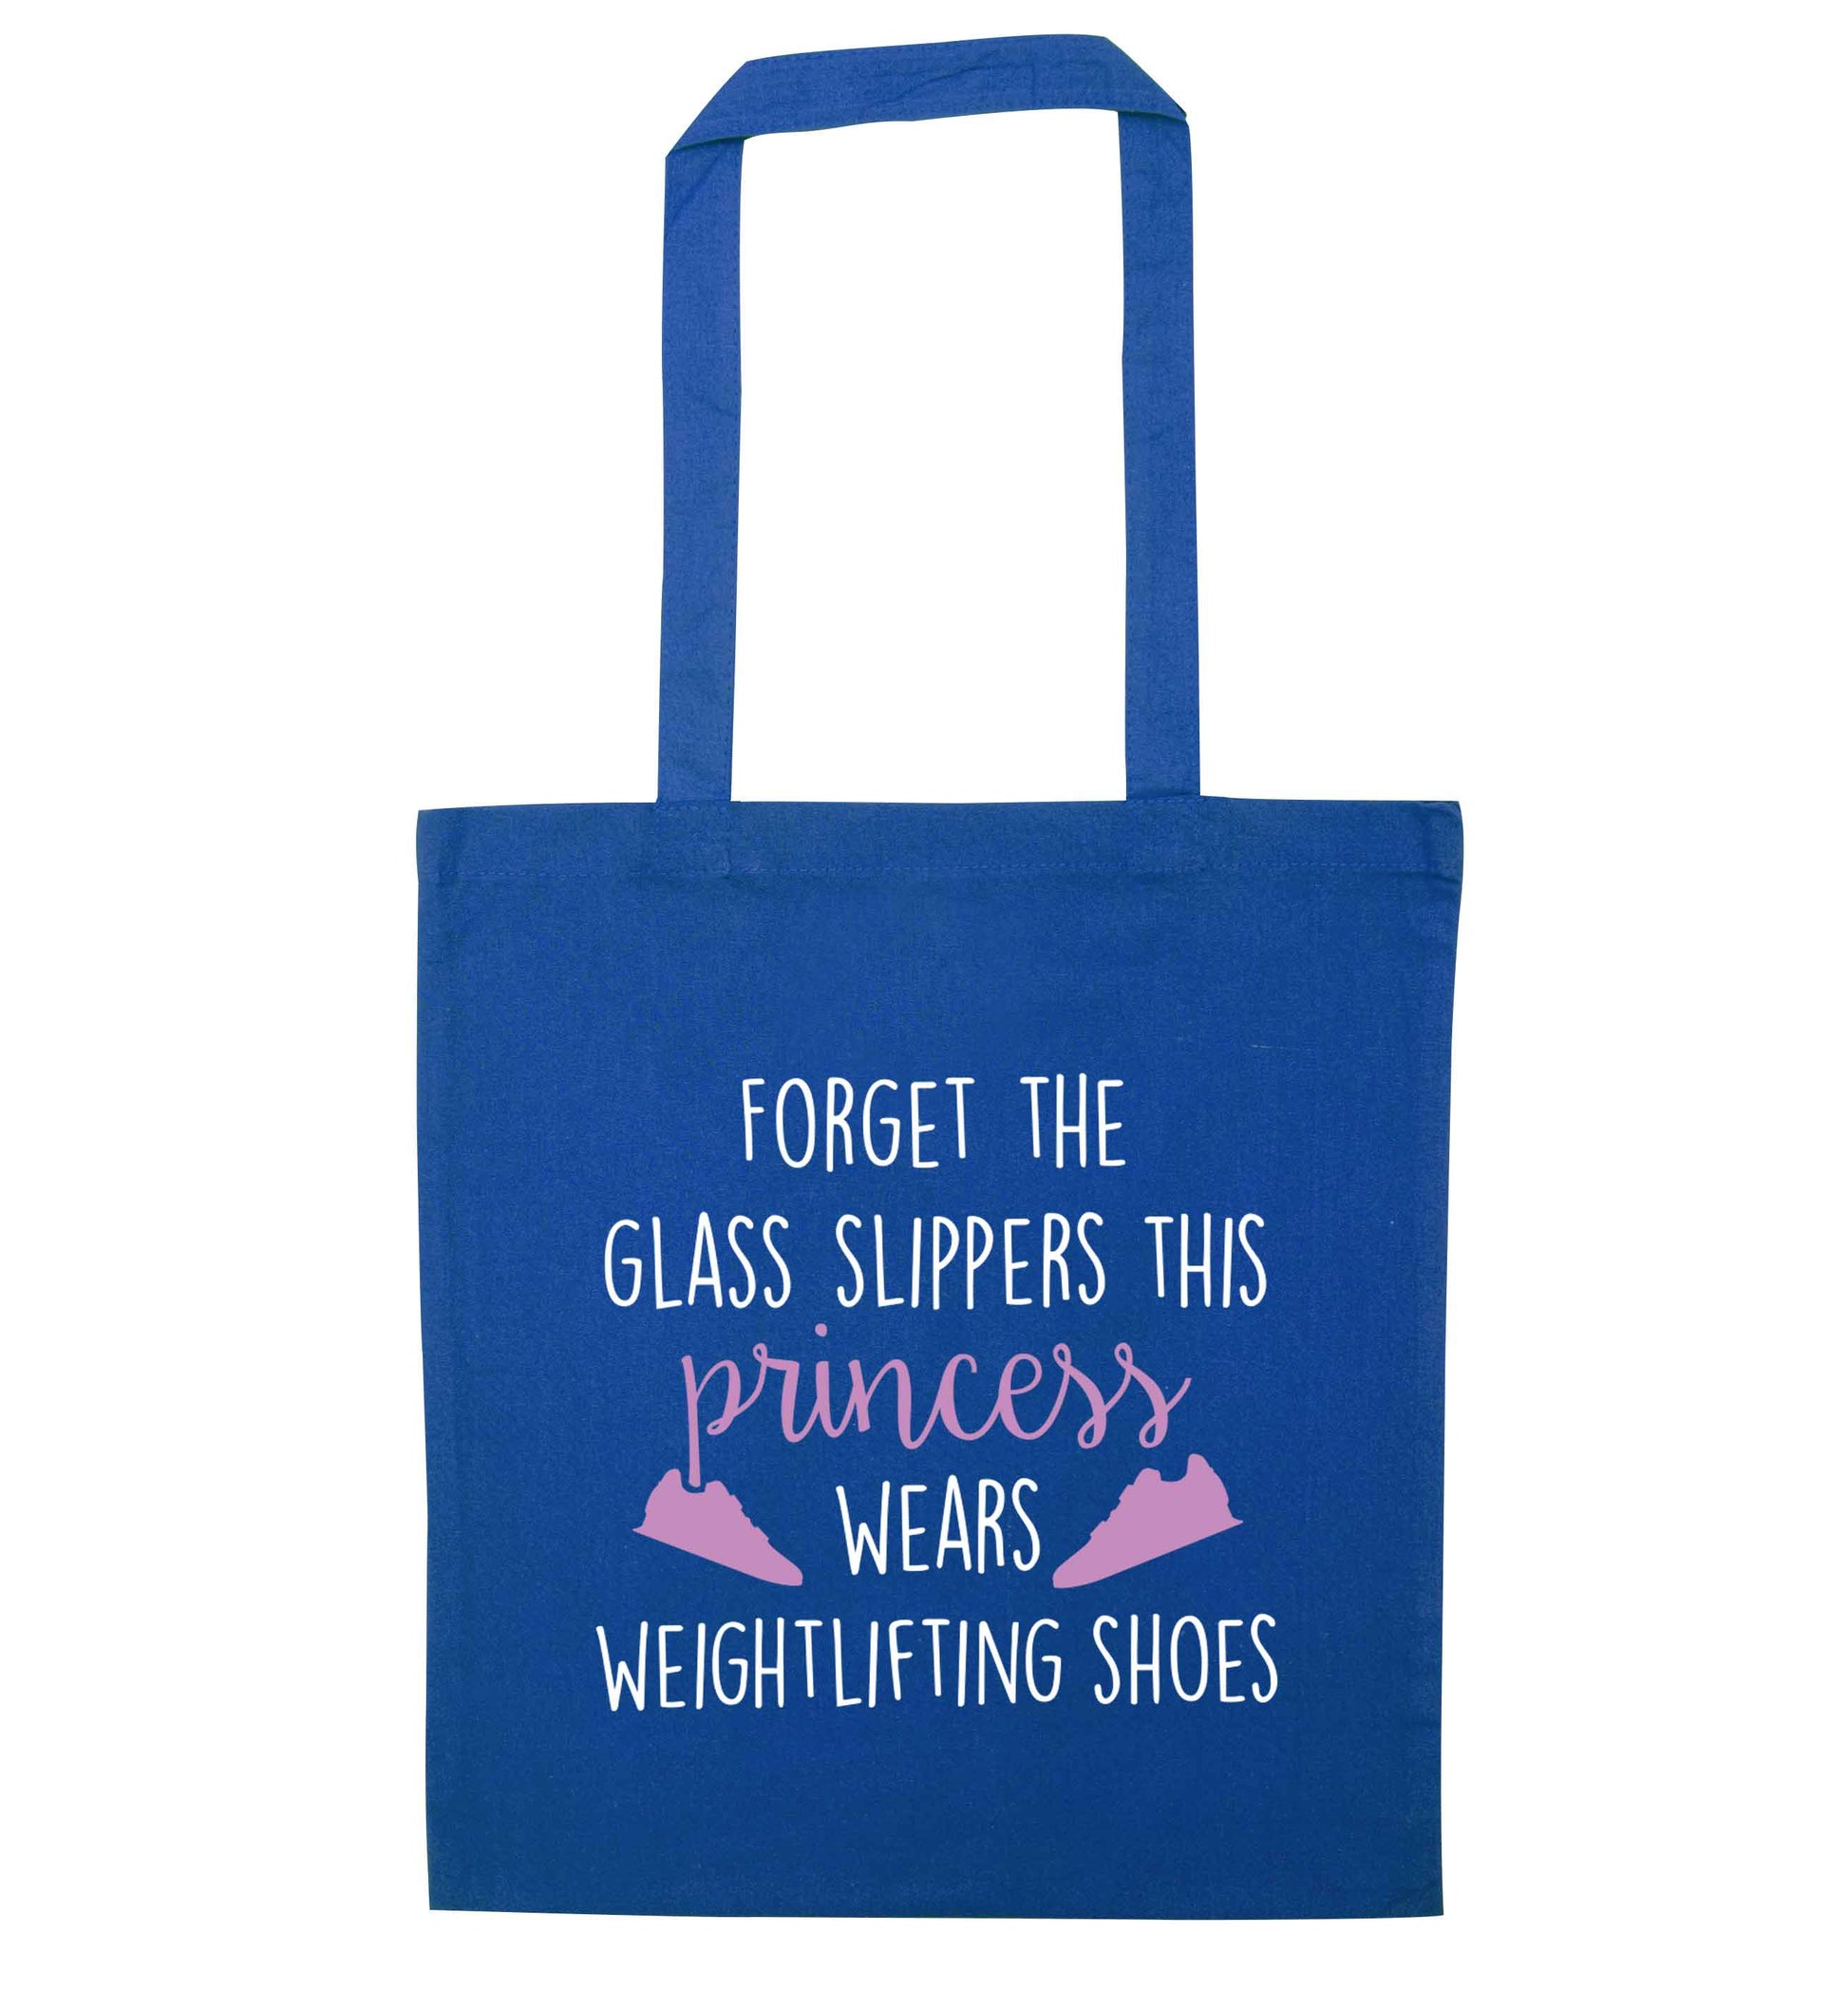 Forget the glass slippers this princess wears weightlifting shoes blue tote bag